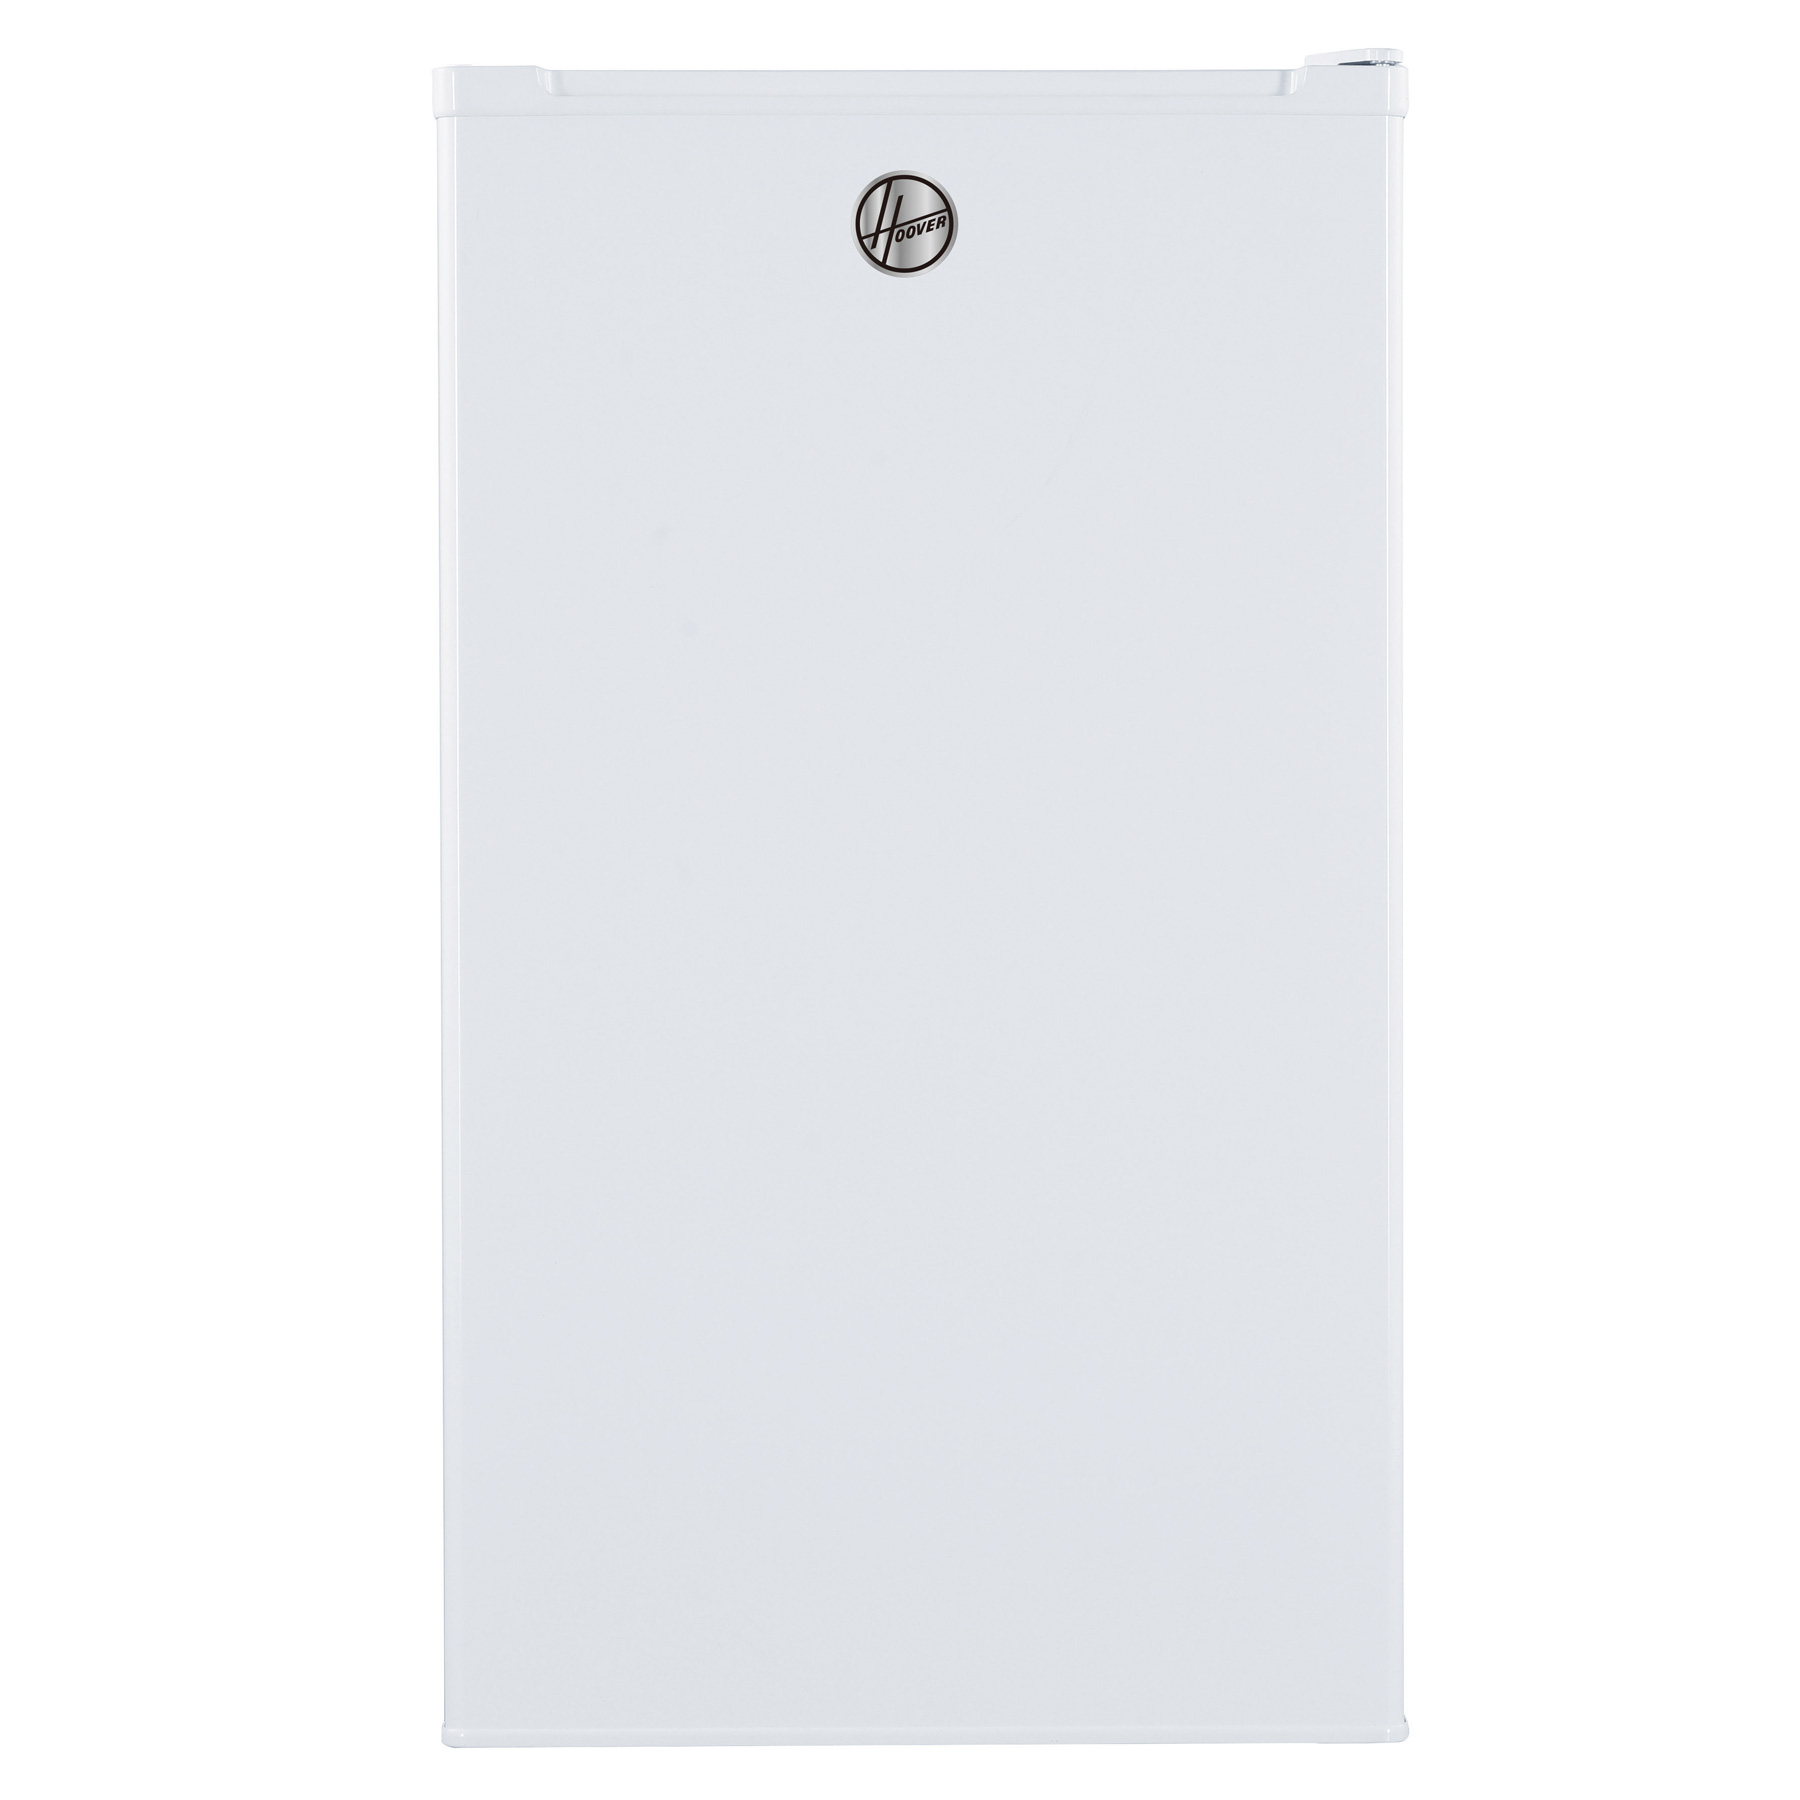 Image of Hoover HHTL482WKN 50cm Undercounter Larder Fridge in White F Rated 88L